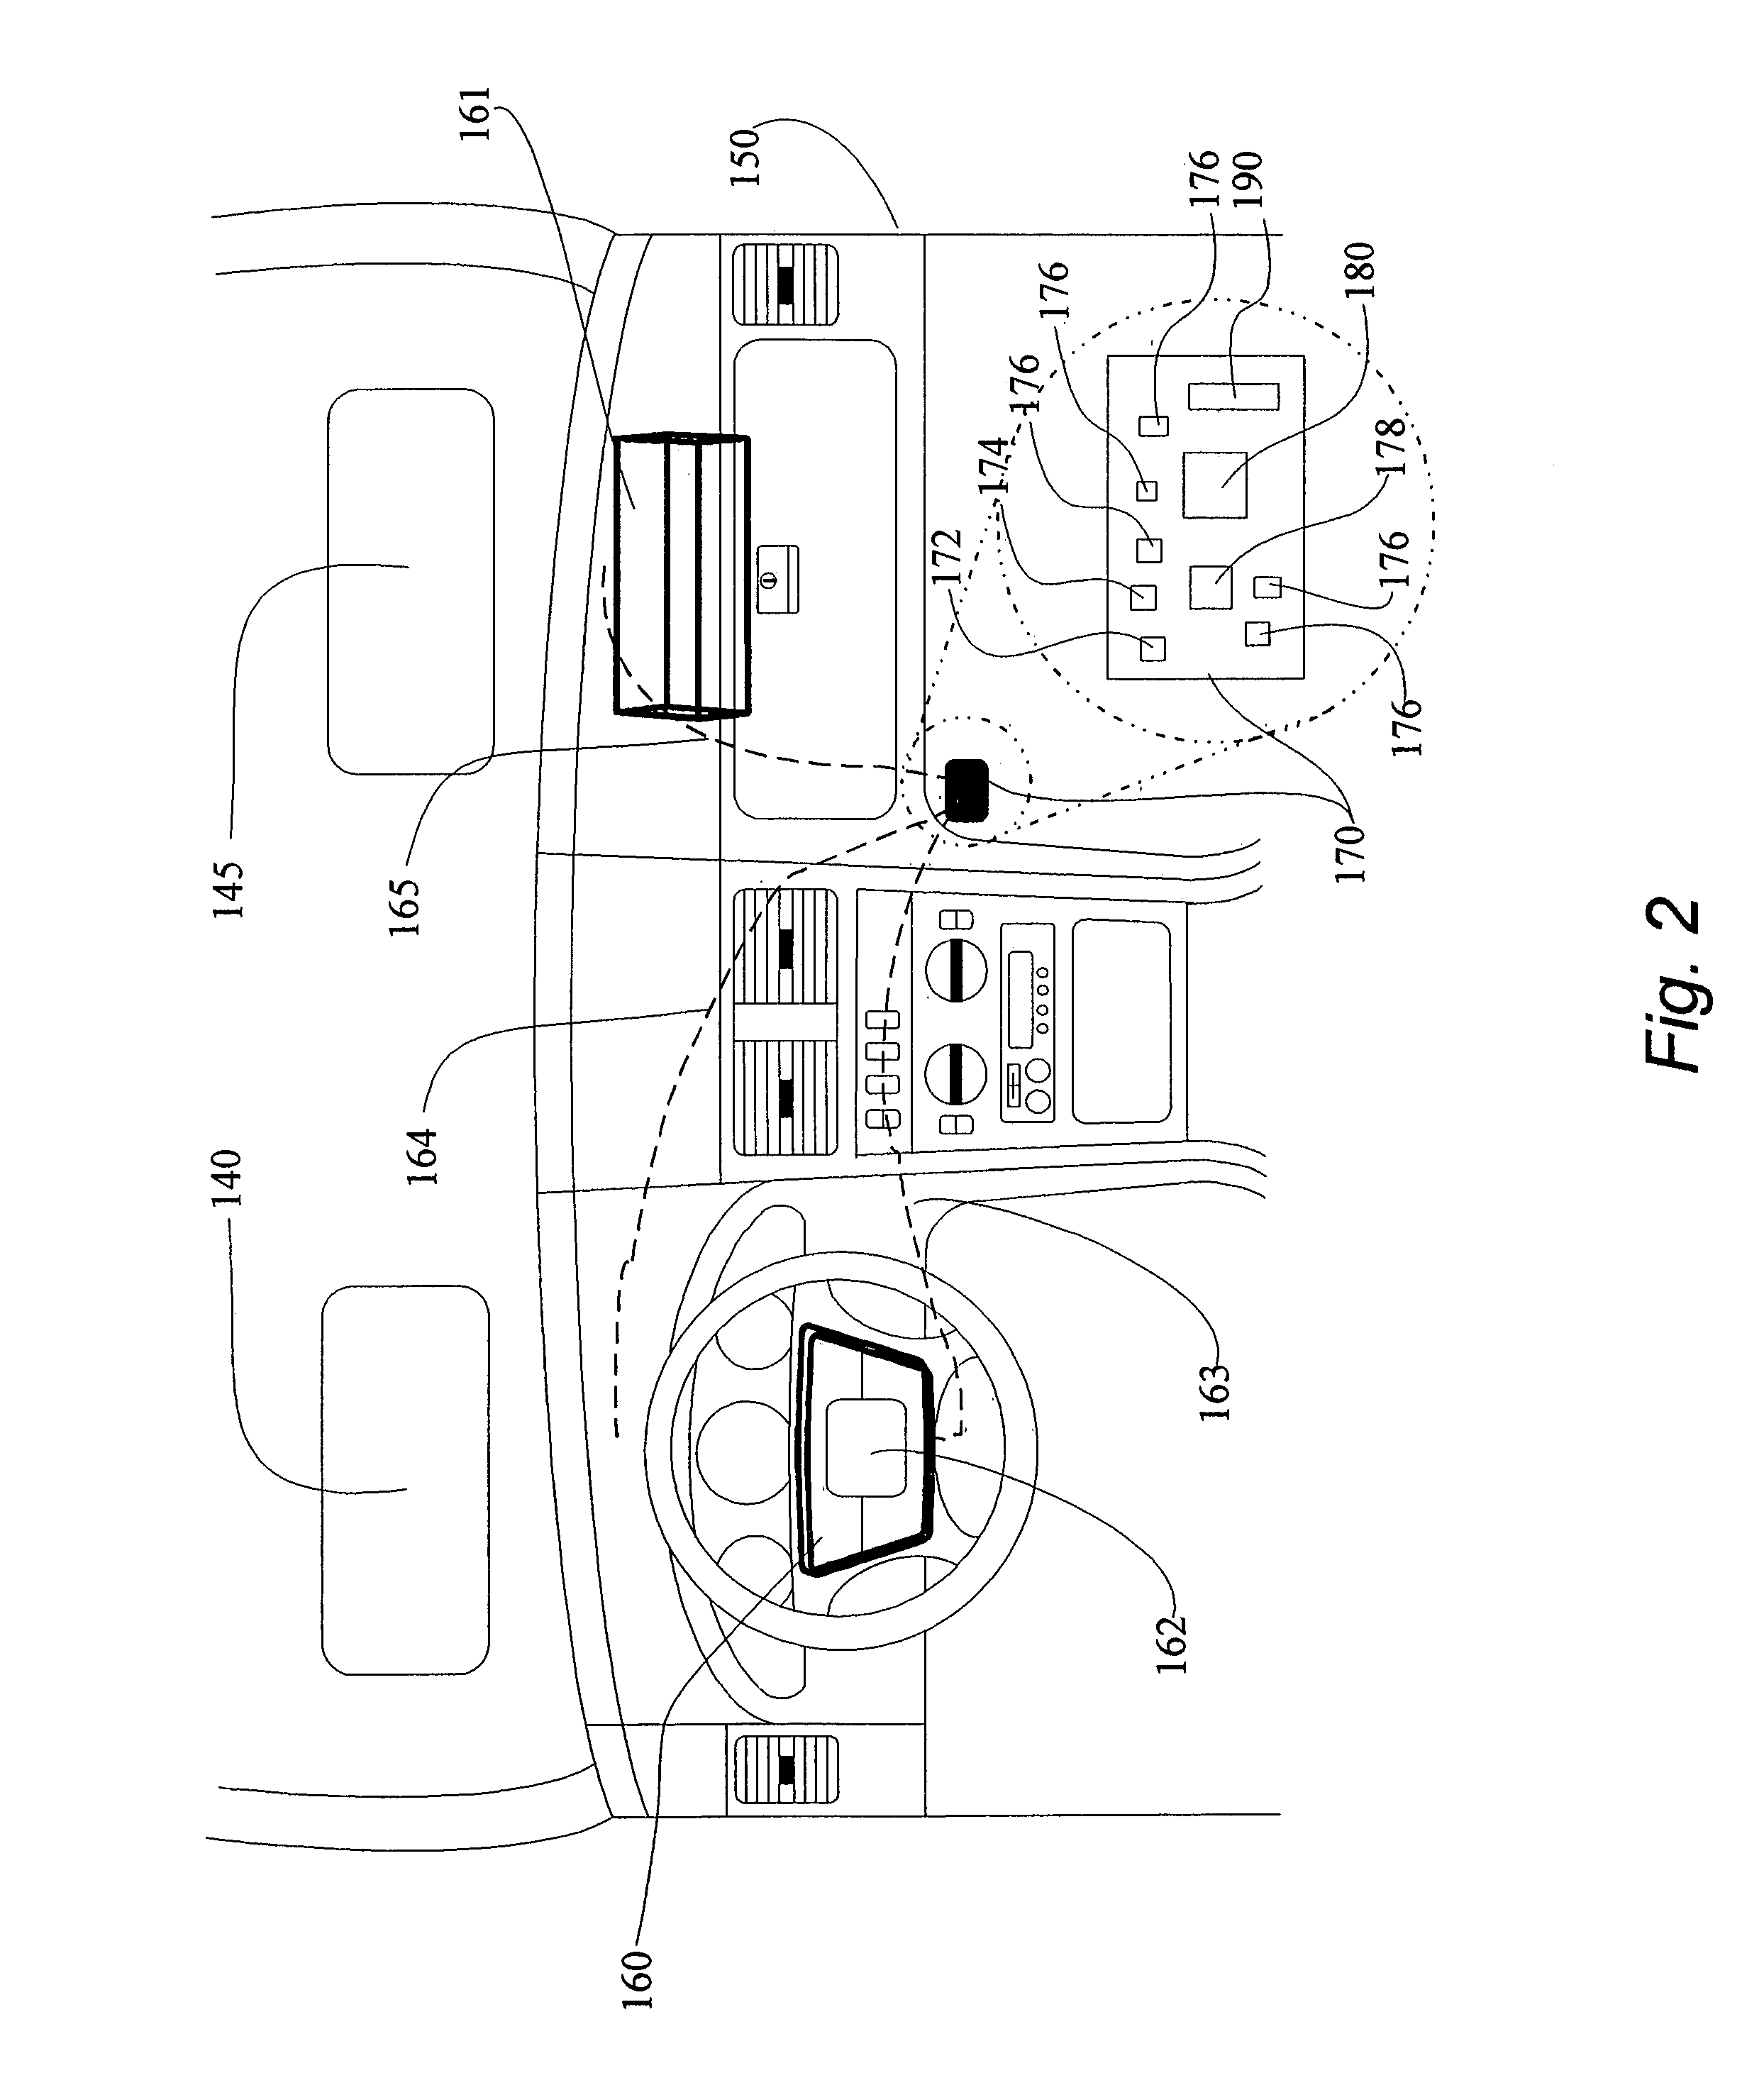 Interactive vehicle display system